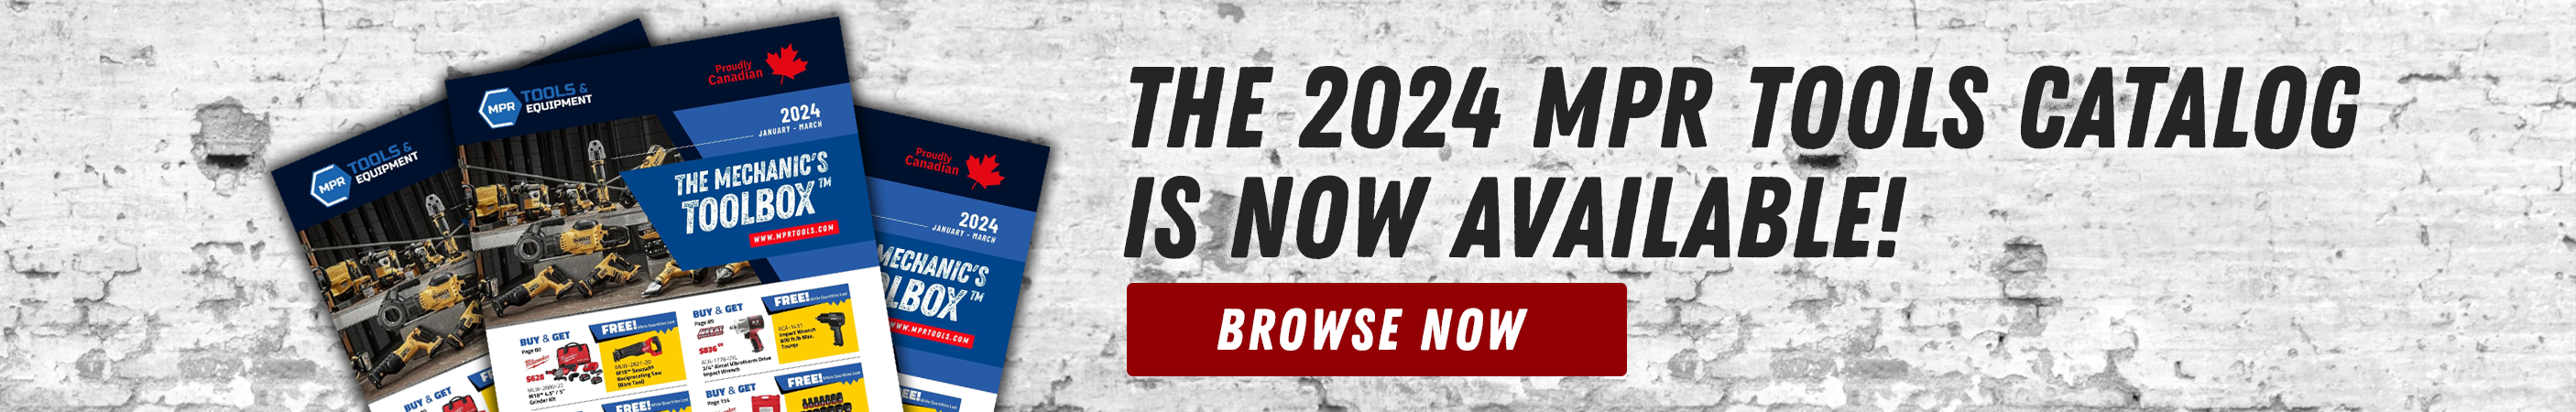 The 2024 MPR Tools Catalog is Now Available!